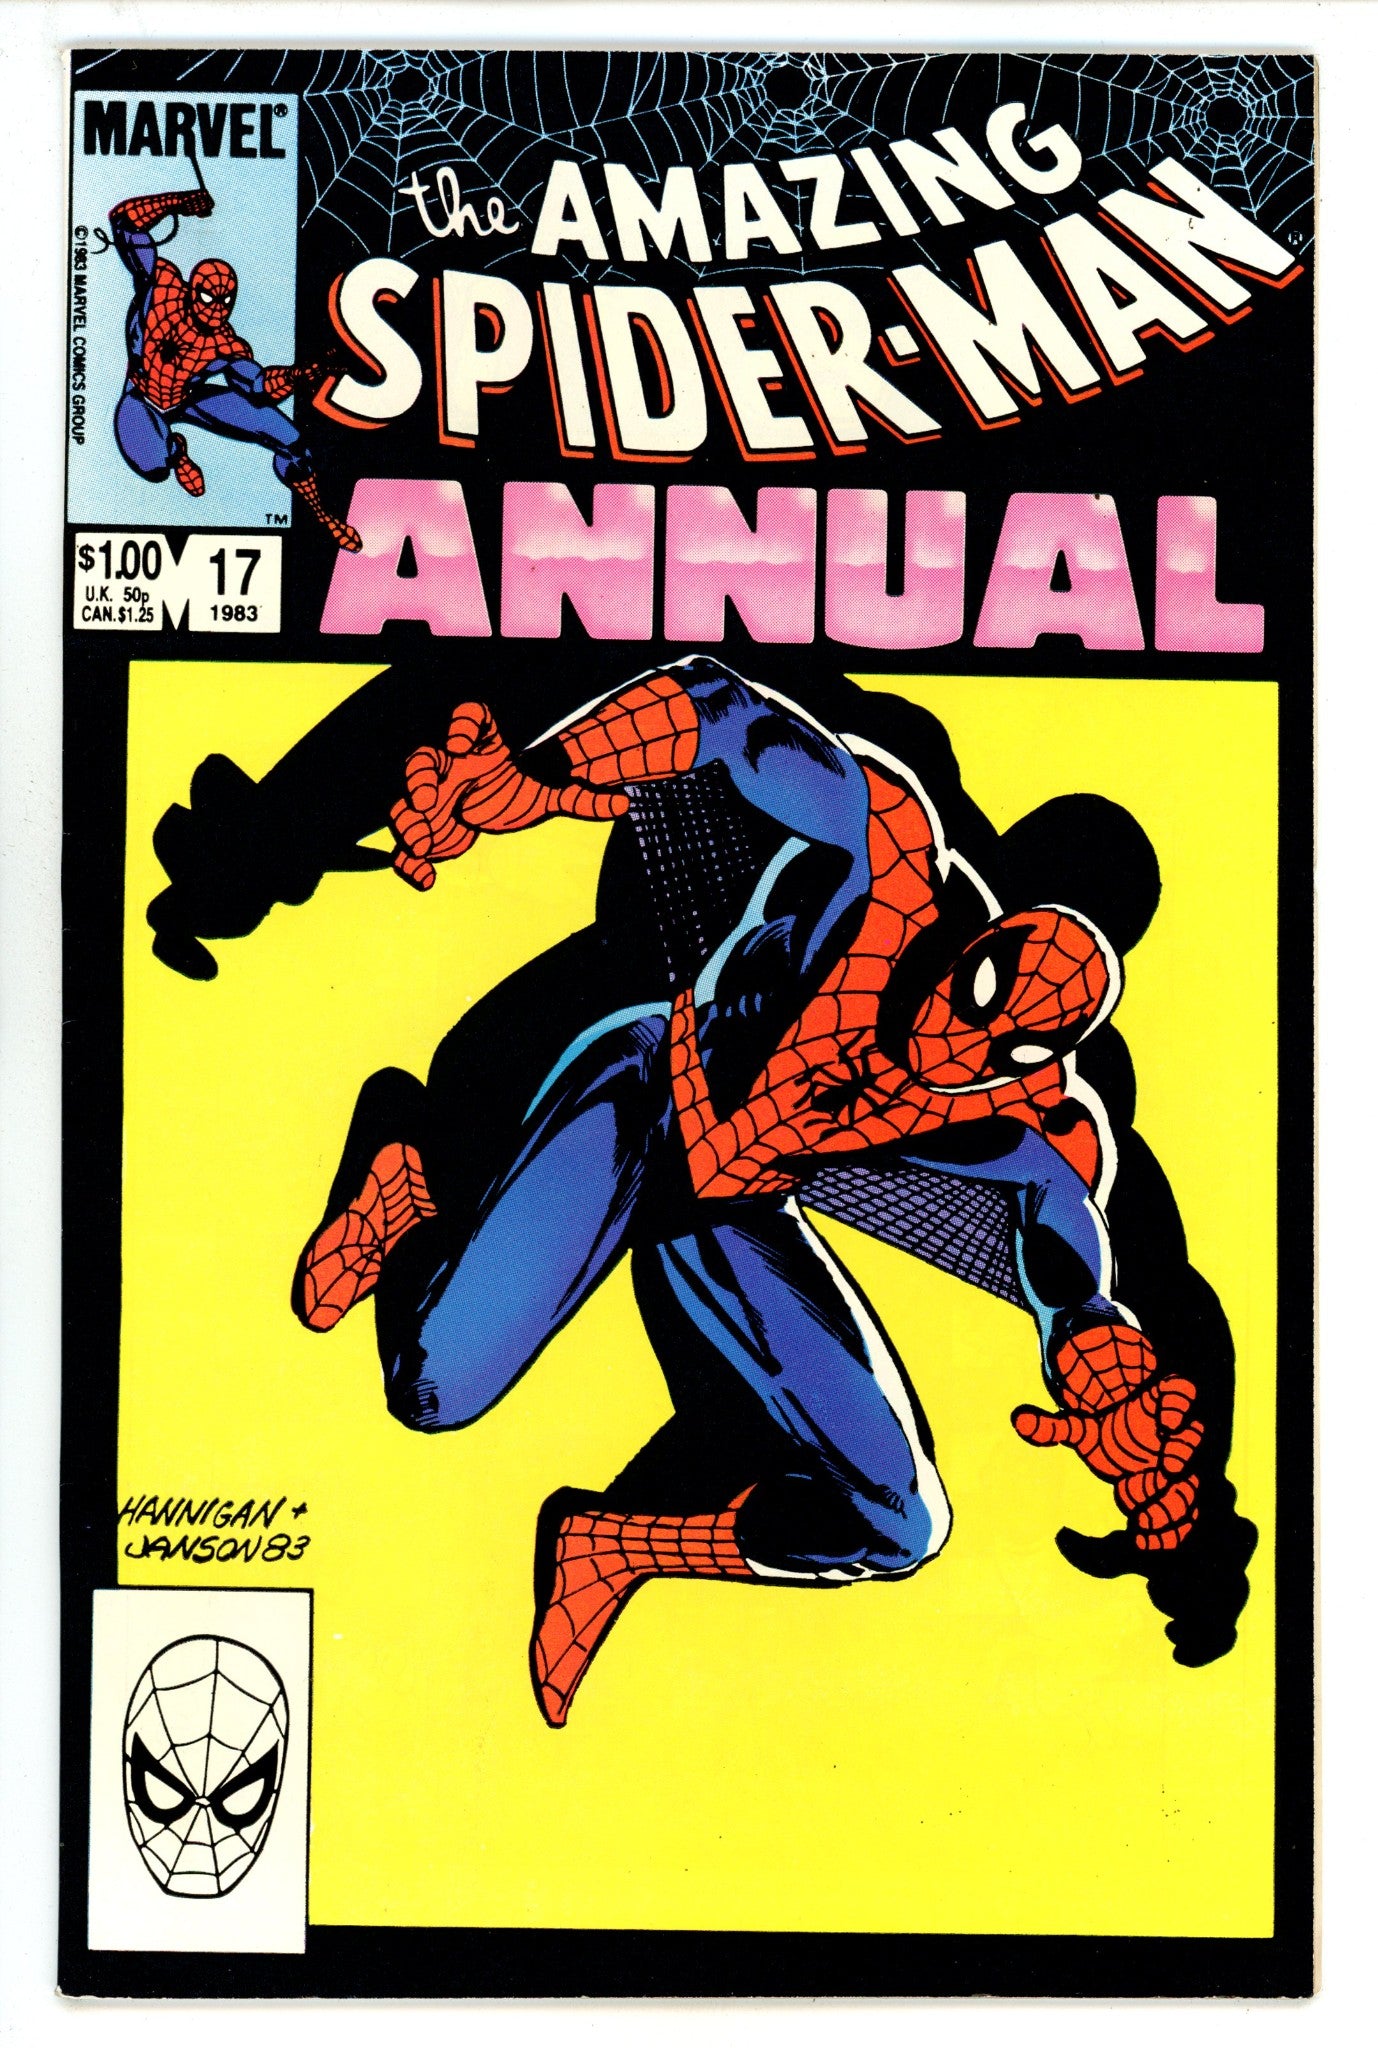 The Amazing Spider-Man Annual Vol 1 17 FN/VF (7.0) (1983) 